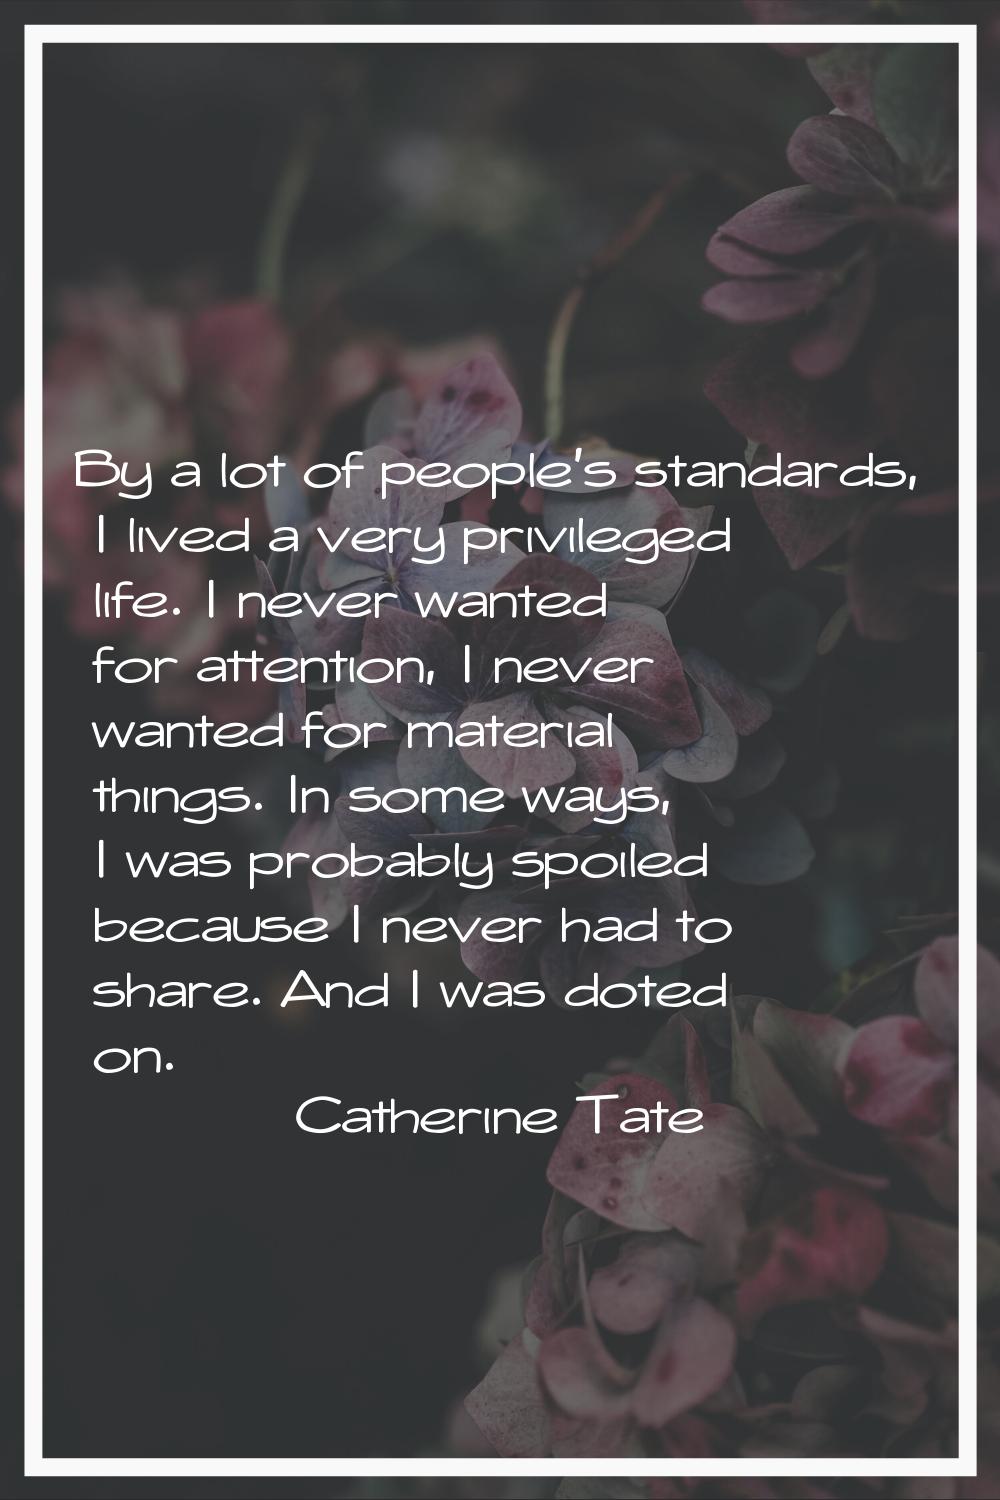 By a lot of people's standards, I lived a very privileged life. I never wanted for attention, I nev